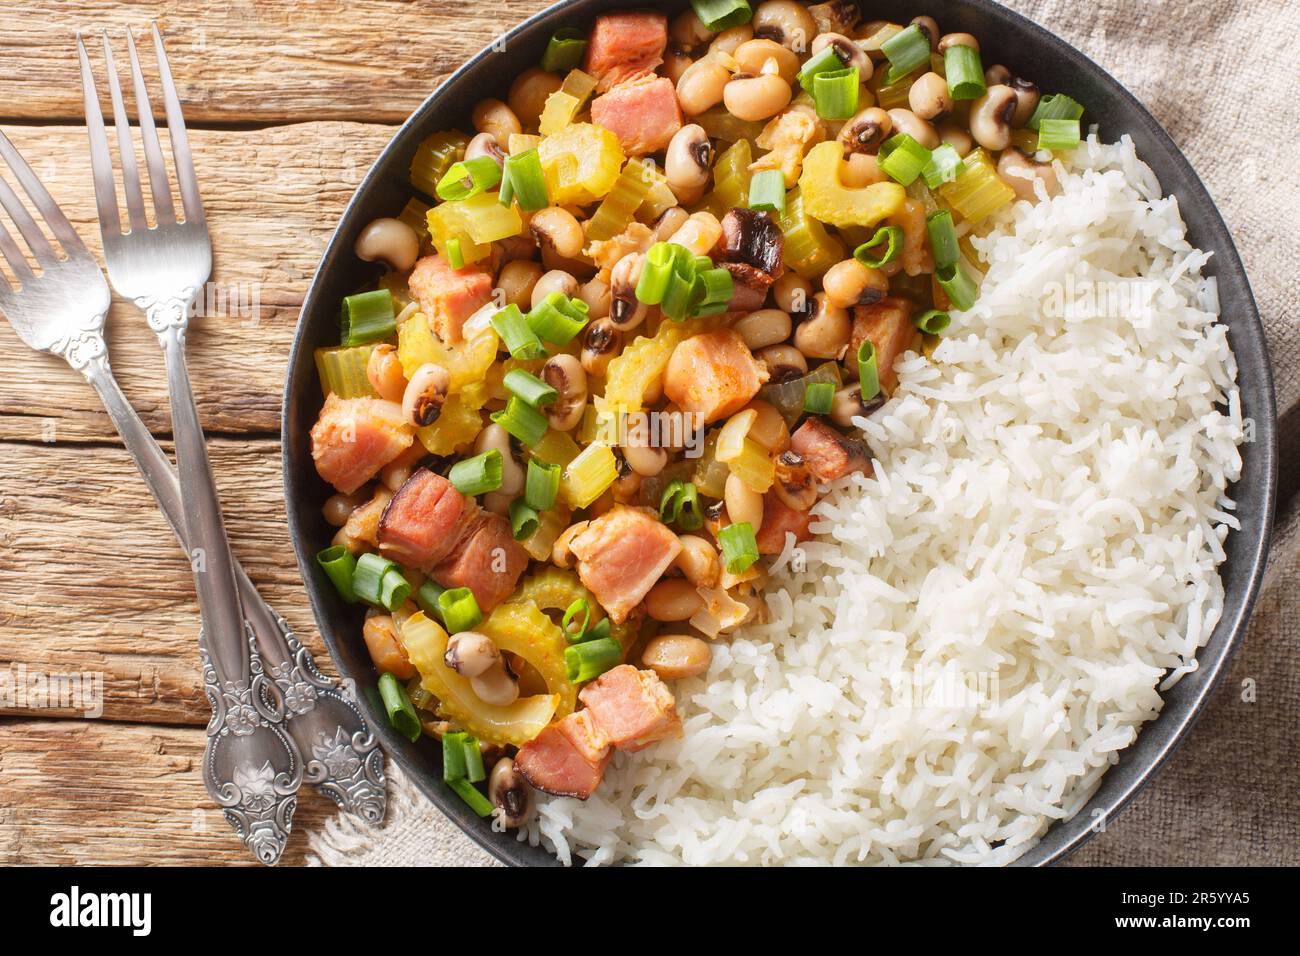 Homemade Hoppin john Southern style New year good luck food is a black-eyed peas and rice with vegetables dish closeup on the plate on the wooden tabl Stock Photo